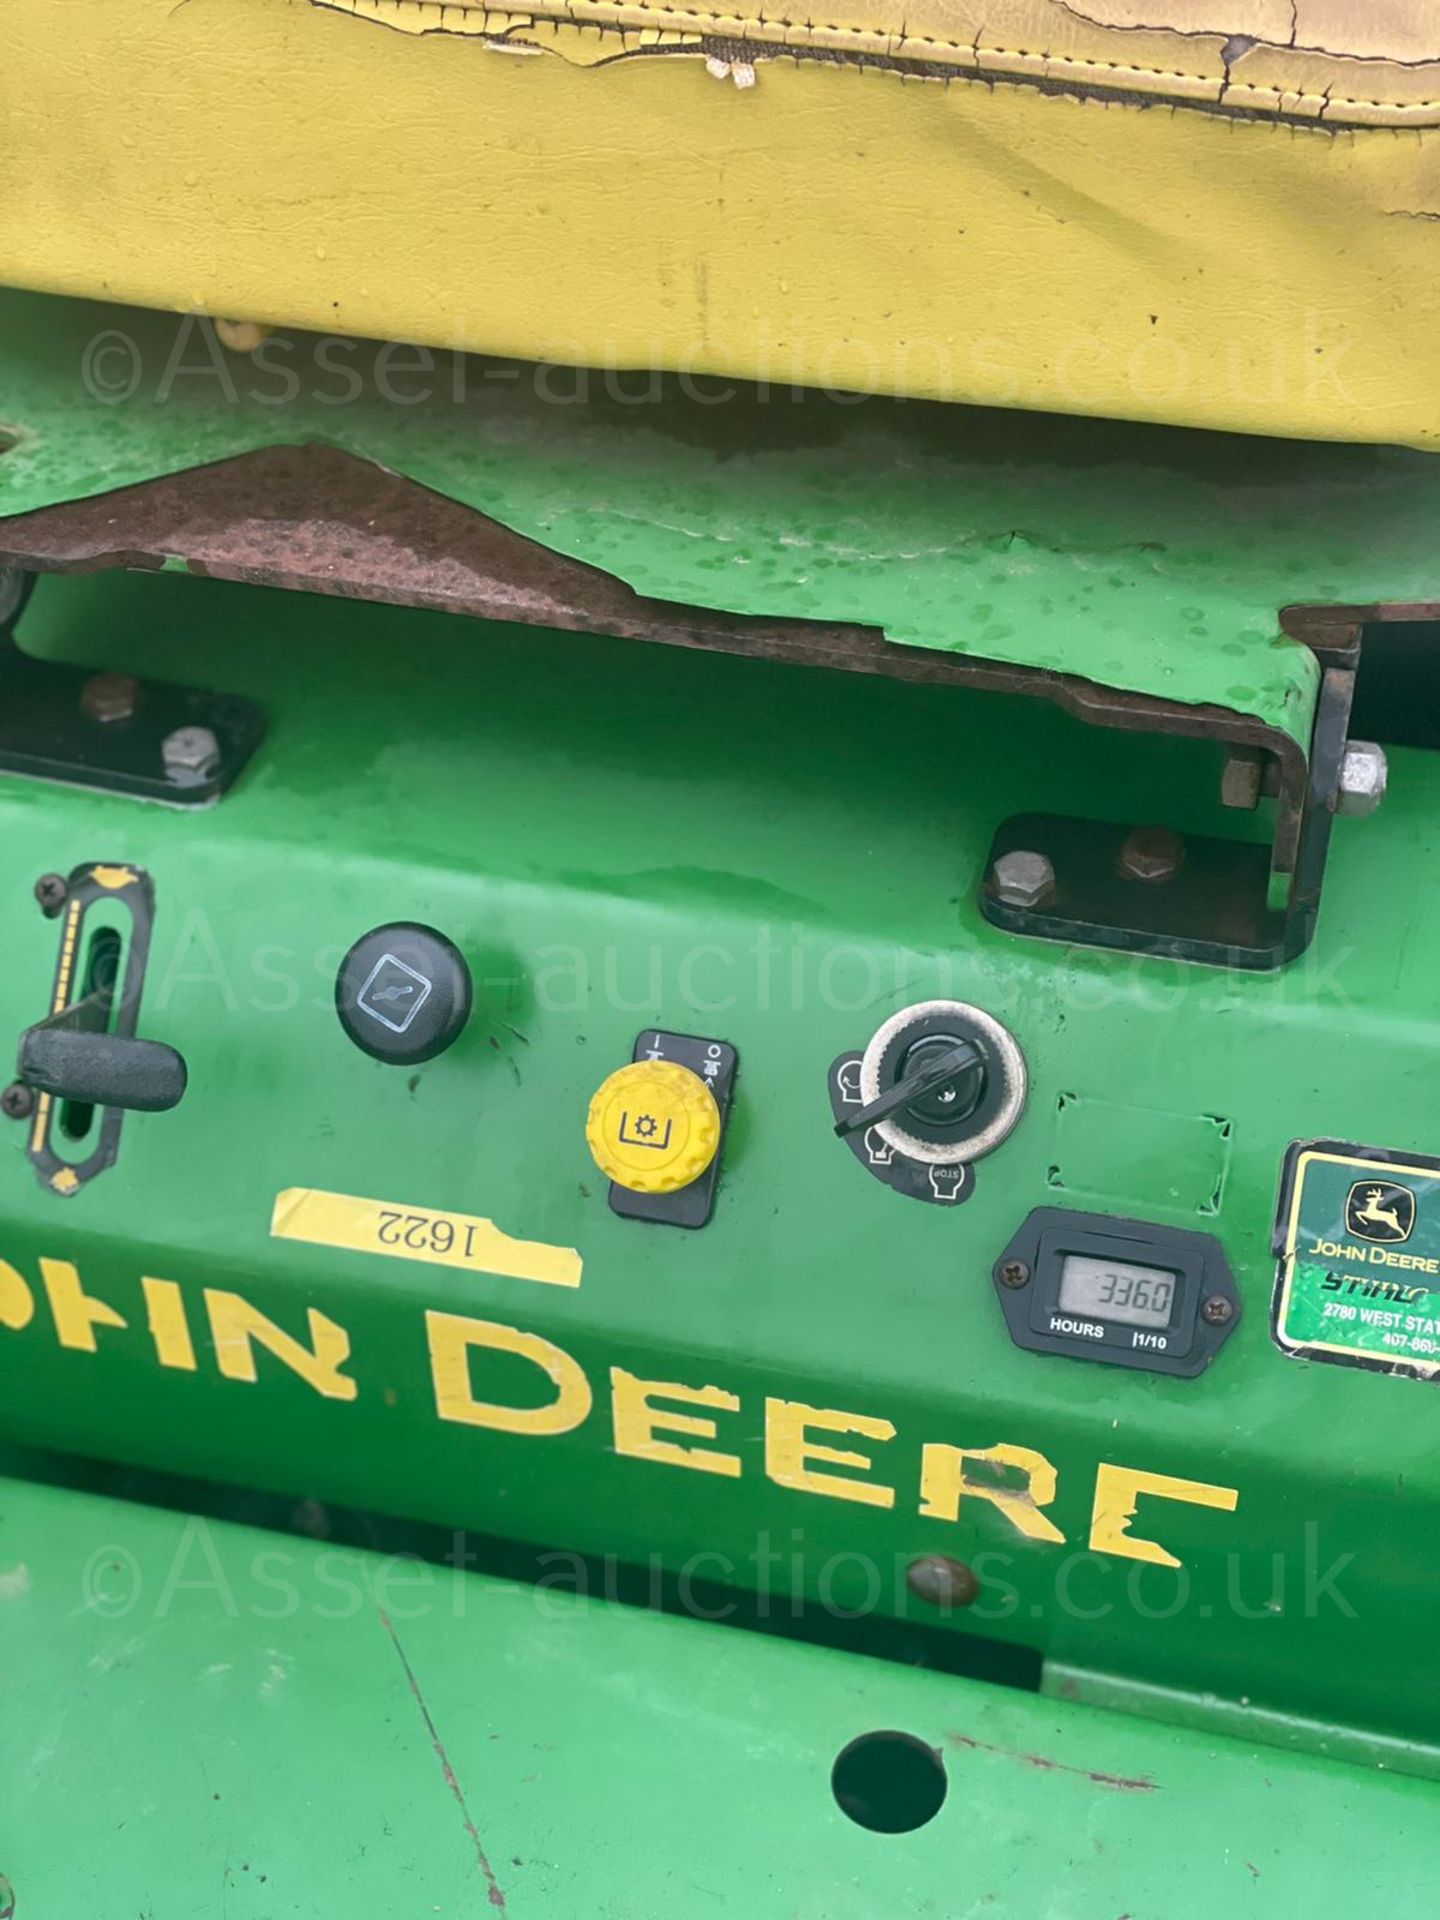 JOHN DEERE 717 Z-TRAK ZERO TURN RIDE ON LAWN MOWER, RUNS DRIVES AND CUTS, SHOWING A LOW 336 HOURS - Image 18 of 18